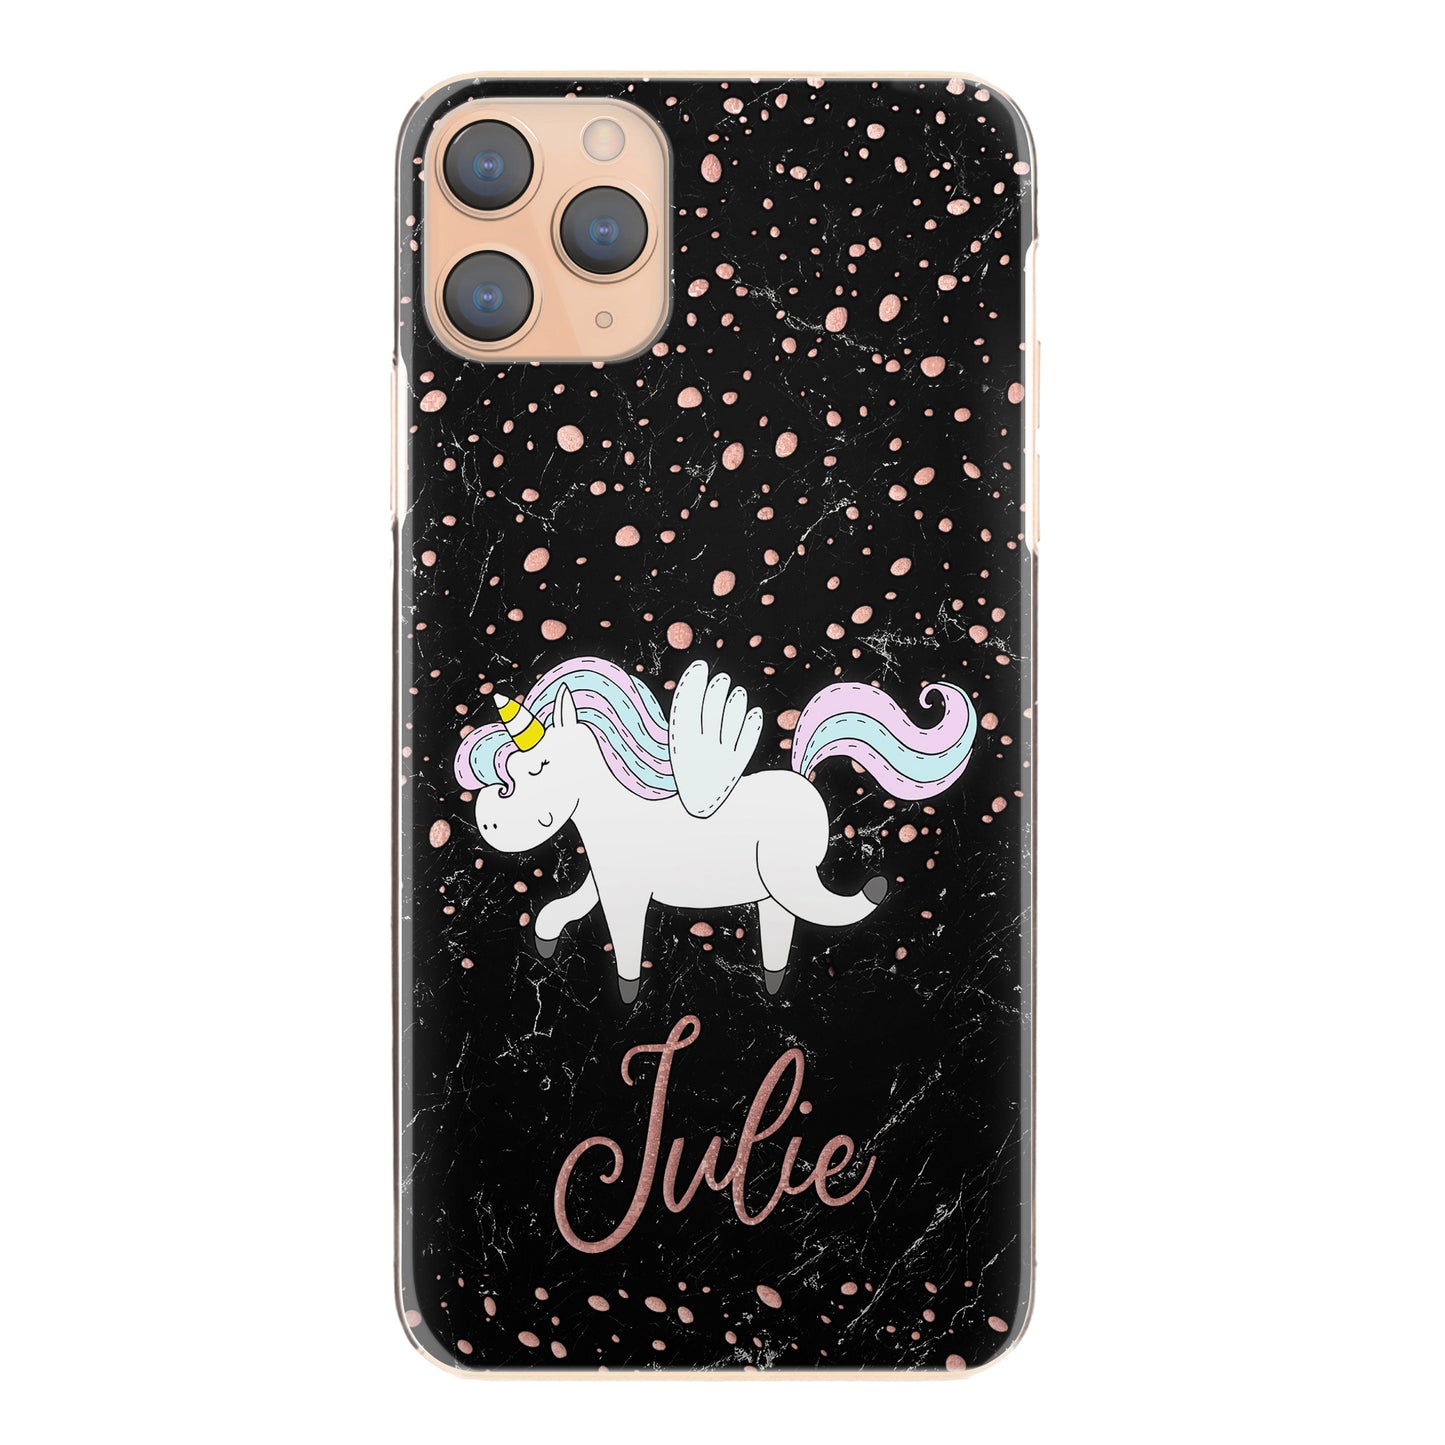 Personalised Motorola Phone Hard Case with Winged Unicorn and Pink Text on Black Marble